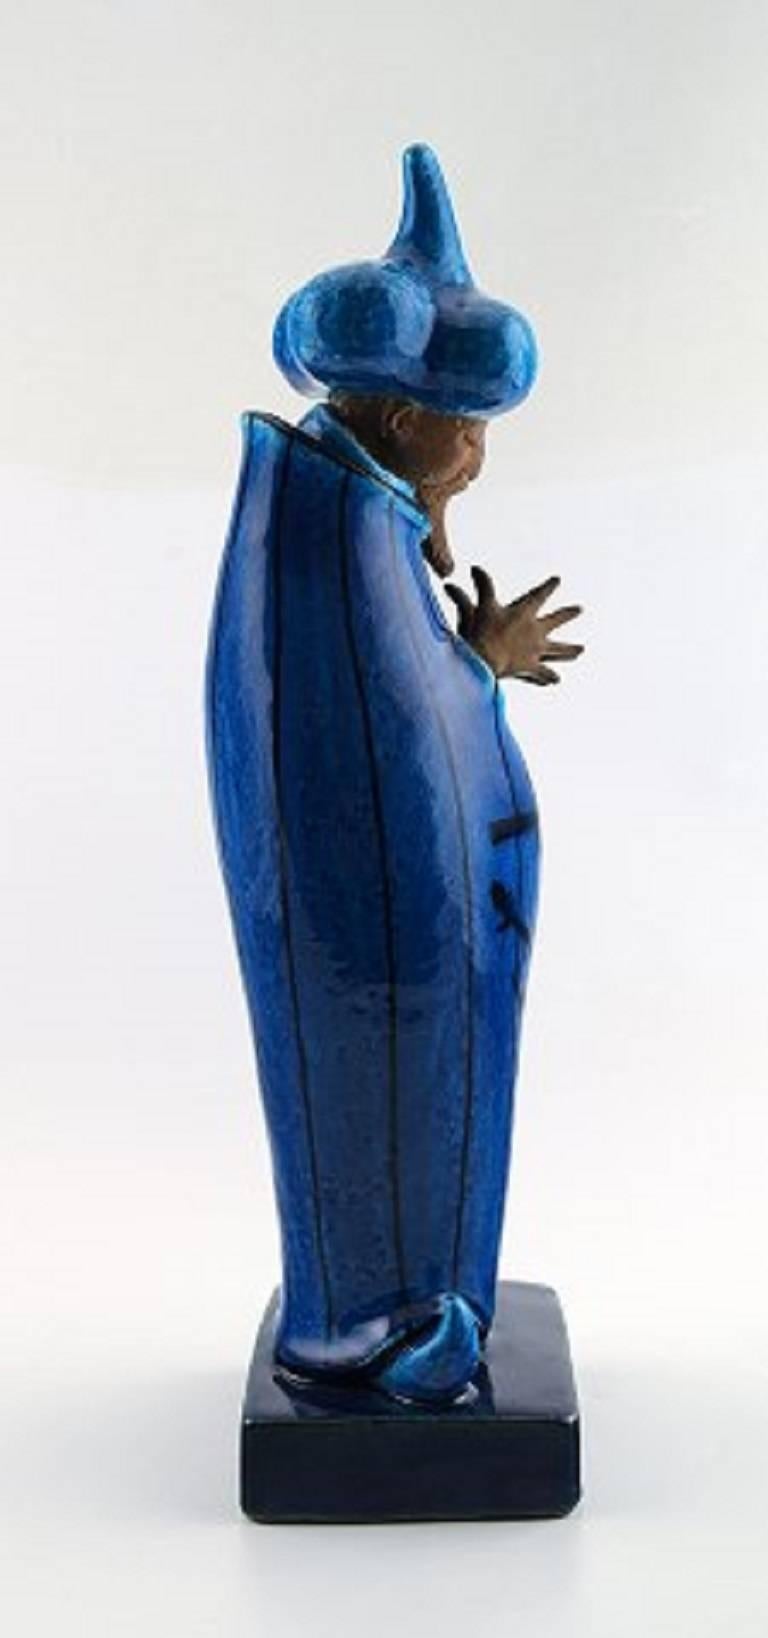 Johannes Hedegaard (1915-1999) for Royal Copenhagen. 

'Grand Vizier' figure of partially glazed stoneware.

Signed Johannes Hedegaard, no. 21700. 

Designed in 1959.

In perfect condition. 1st. factory quality.

Measures: Height 44 cm.